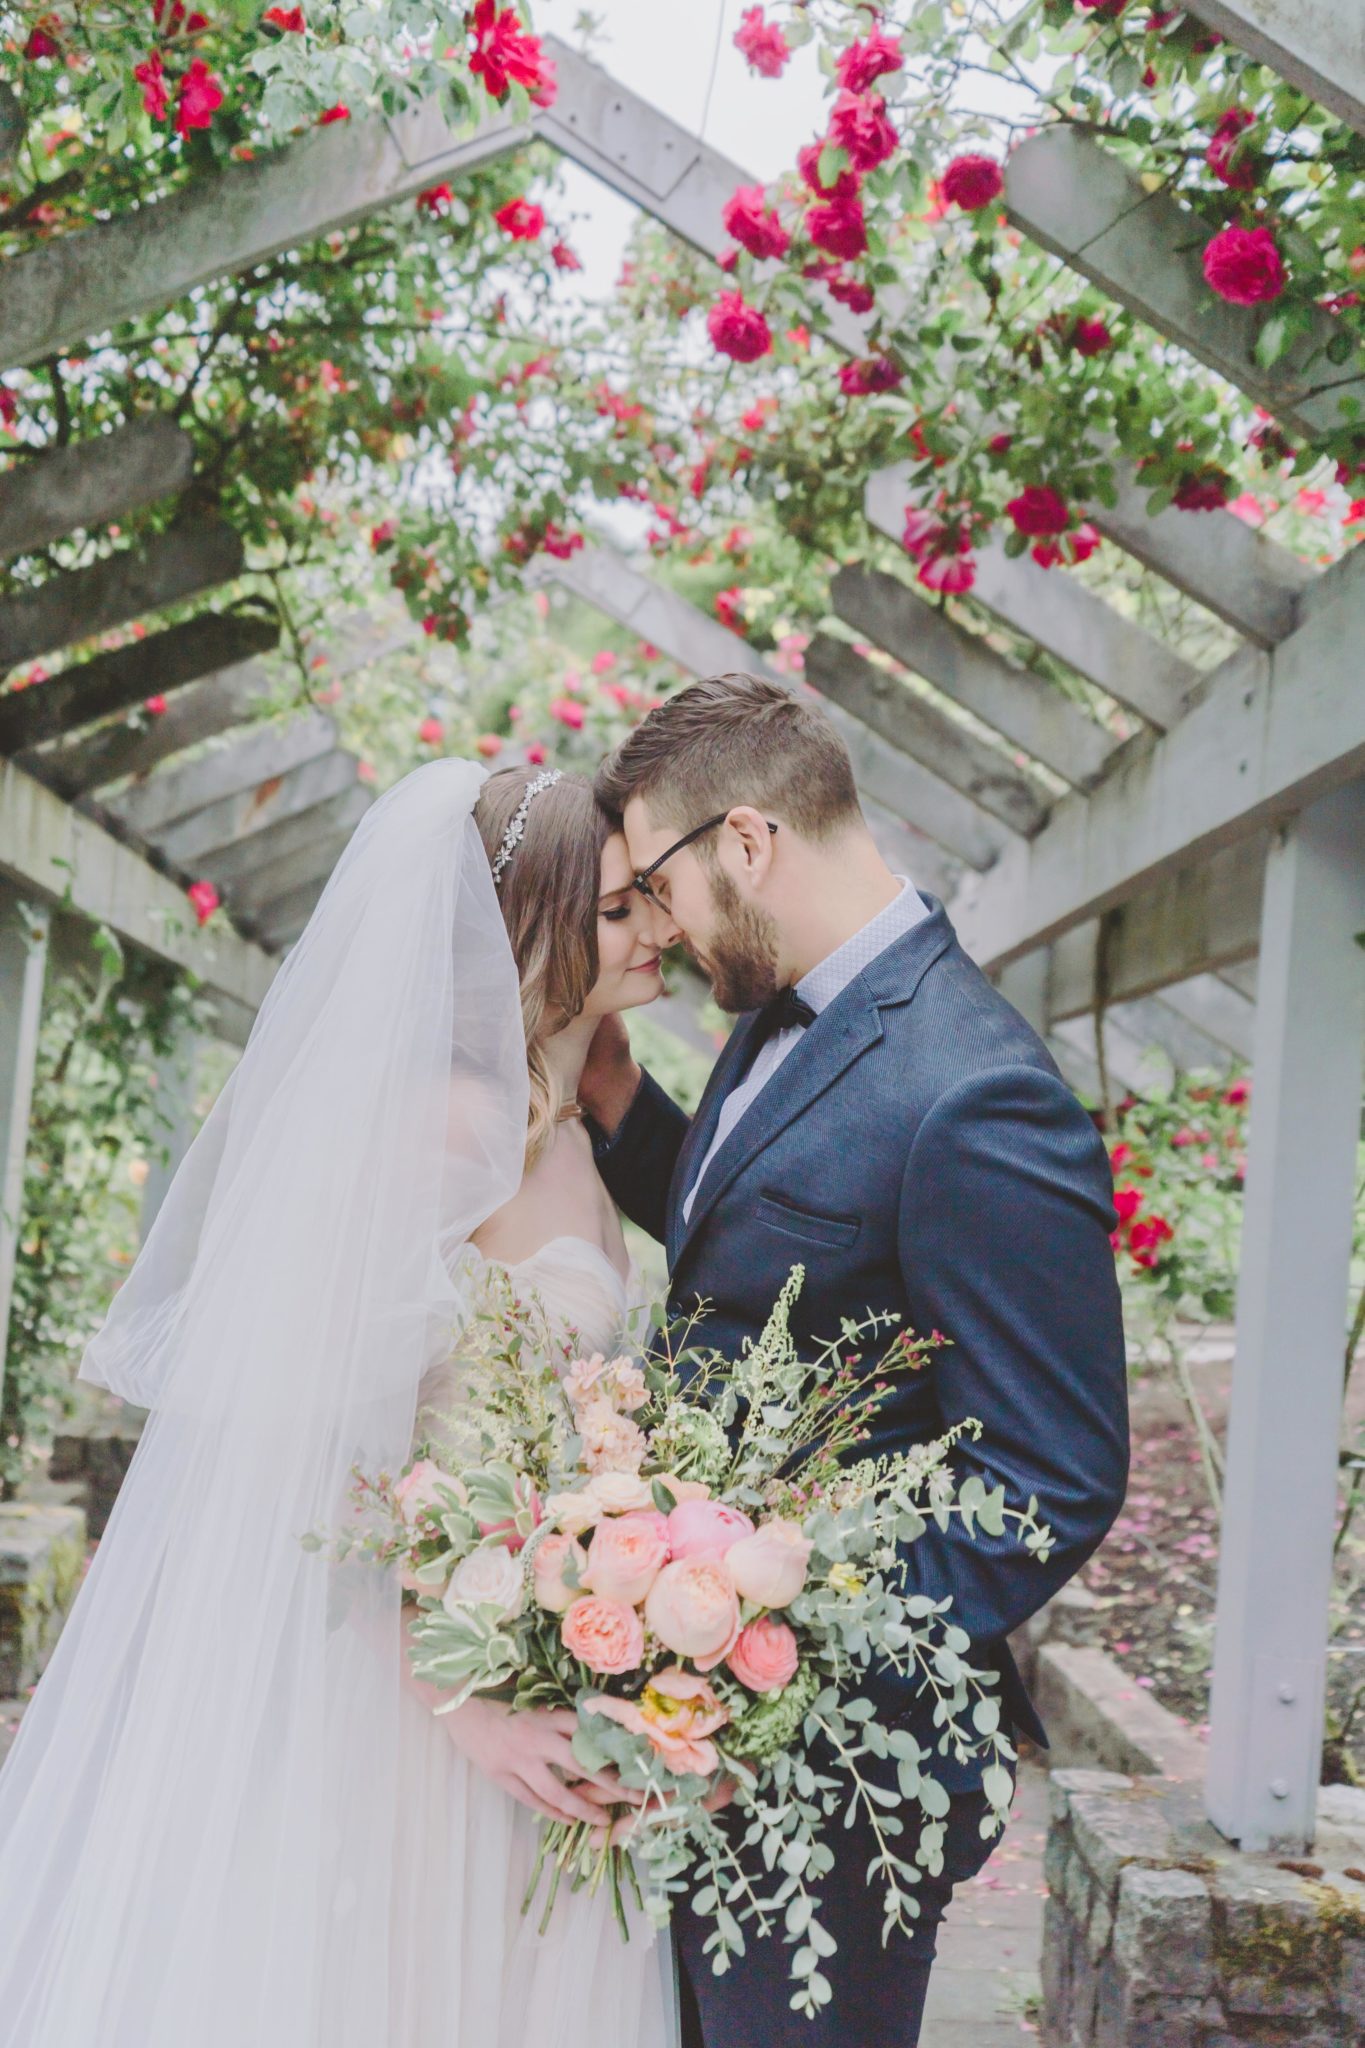 Romantic rose garden wedding inspiration with cathedral veil